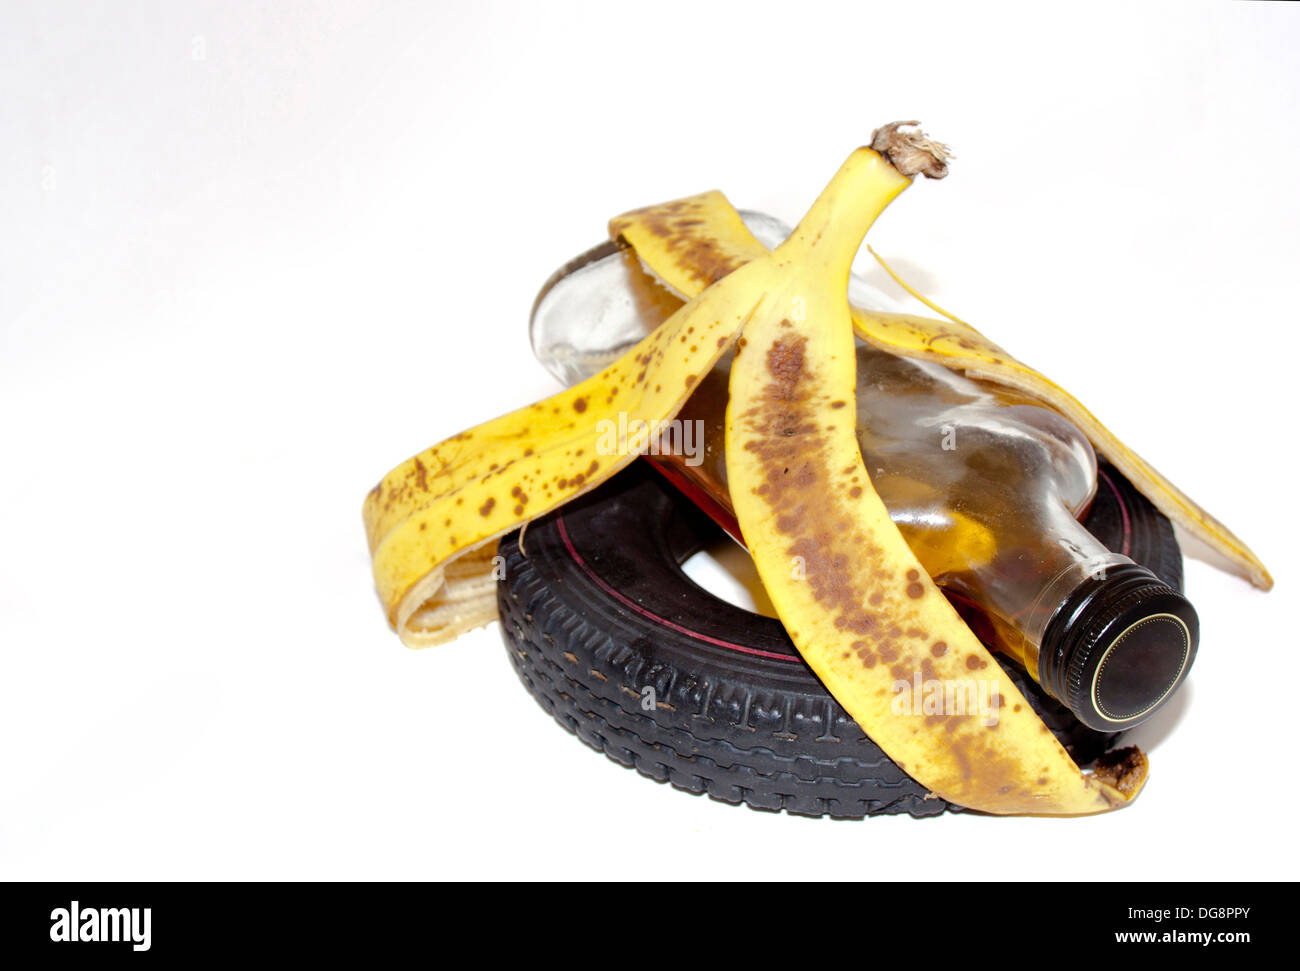 No drinking and driving concept with slippery banana peel holding together alcohol bottle an vehicle tire Stock Photo